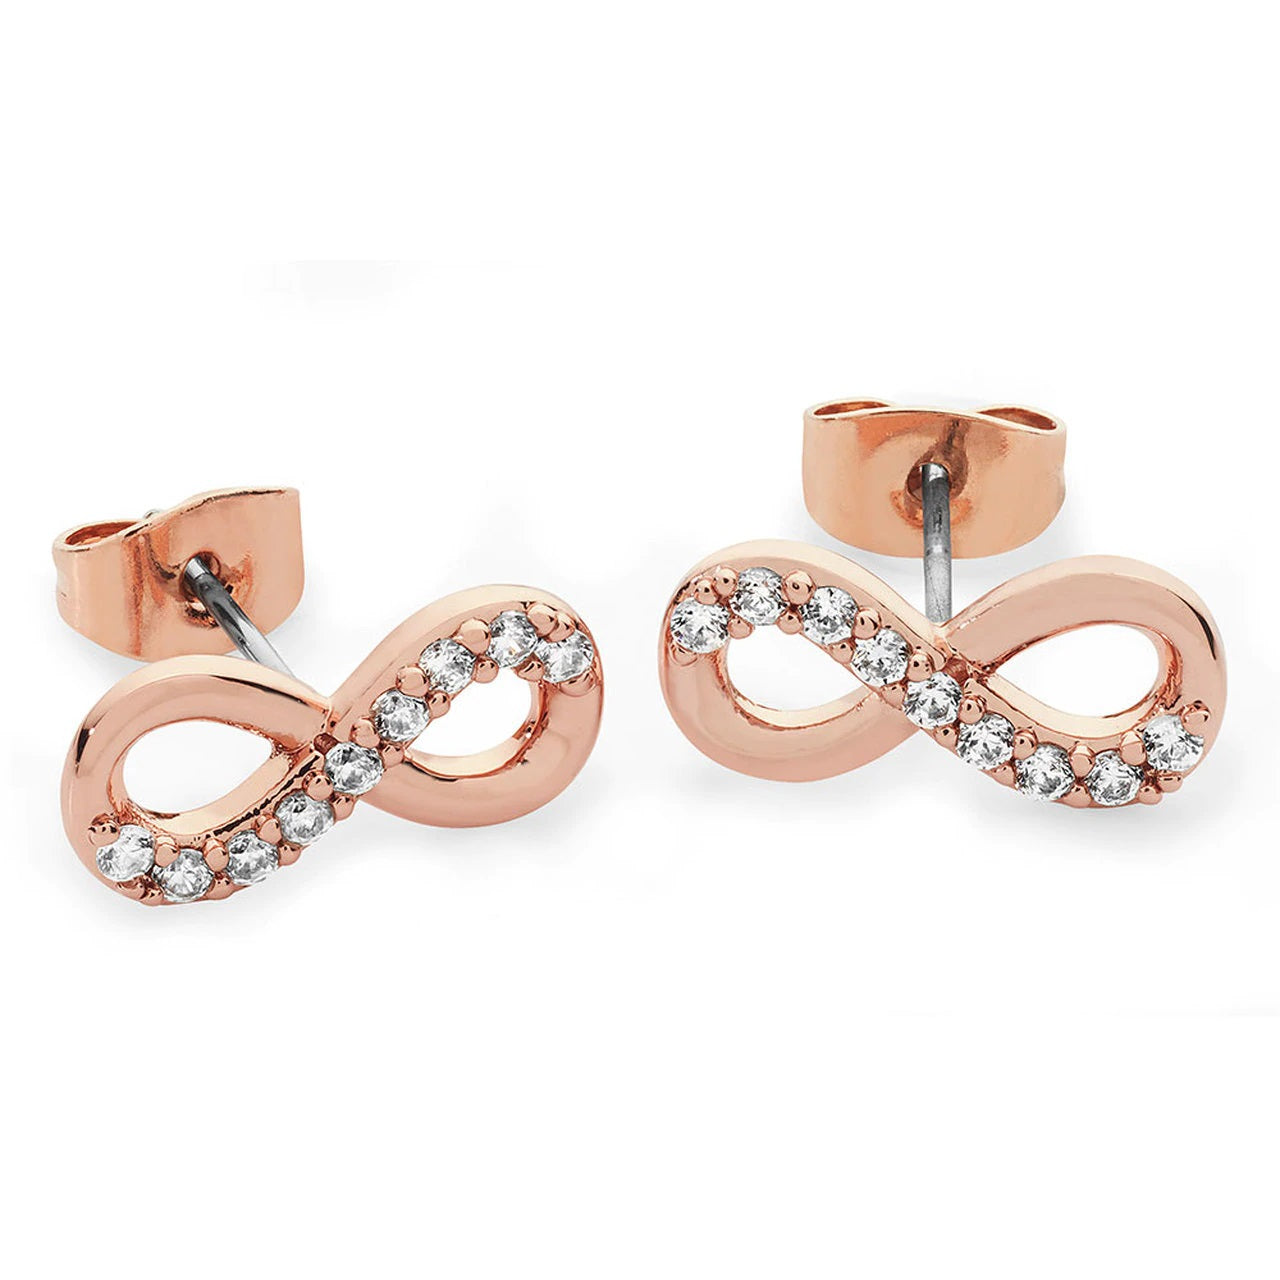 Tipperary Crystal Part Stone Set Infinity Stud Earrings Rose Gold  These  earrings are from our Infinity Collection. These elegant earrings are a beautiful expression of “reﬁned style”. The romantic rose gold design features a symetrical inﬁnity symbol partially lined with a row of dazzling round clear crystals. Finished with a bright polished lustre, they secure comfortably with push backs.